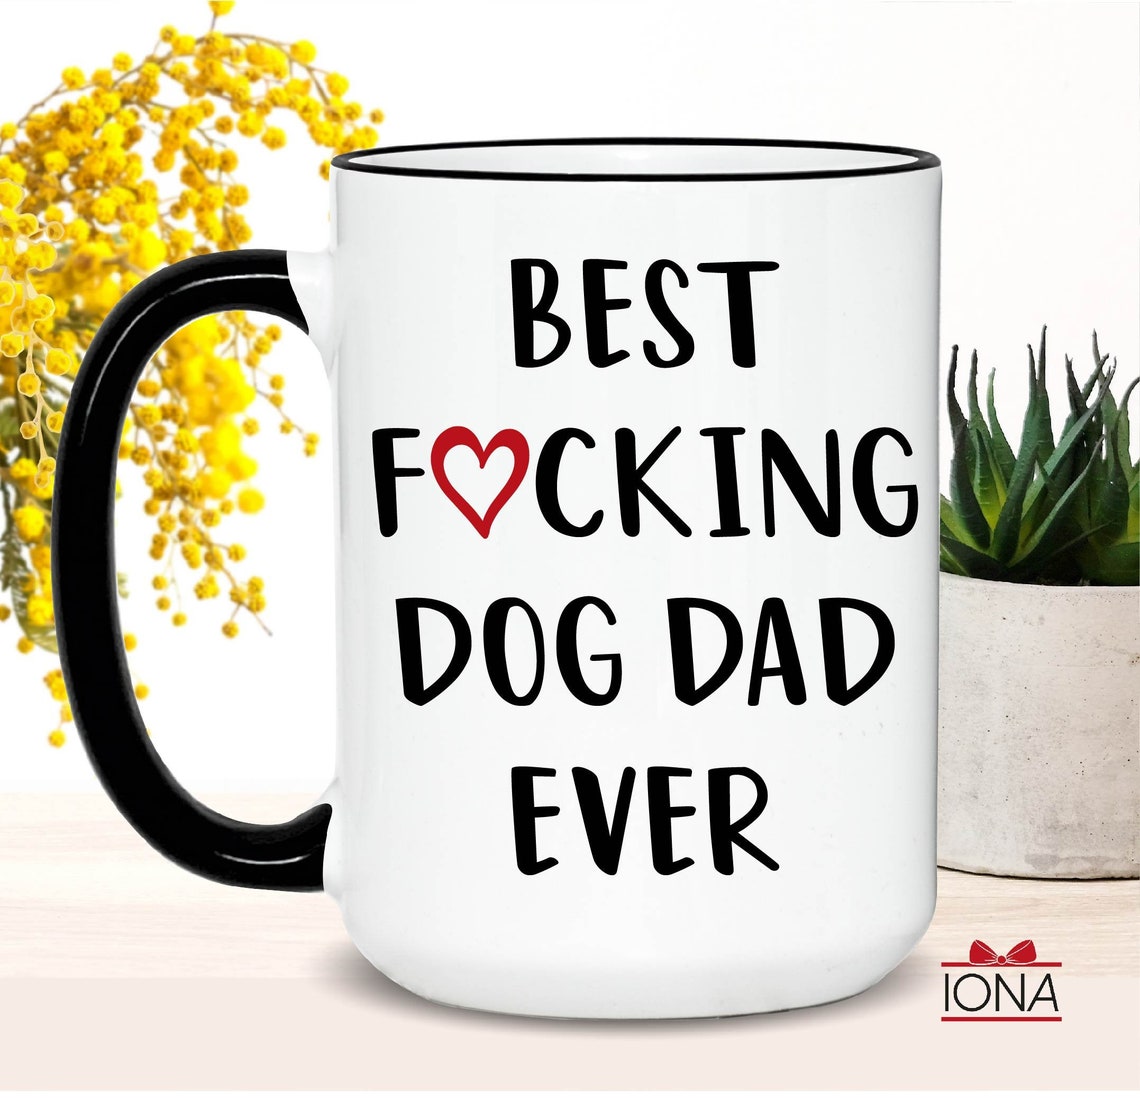 Funny Dog Dad Coffee Mug - Best Dog Dad Father’s Day Gift for Men - Funny Morning Coffee Cup